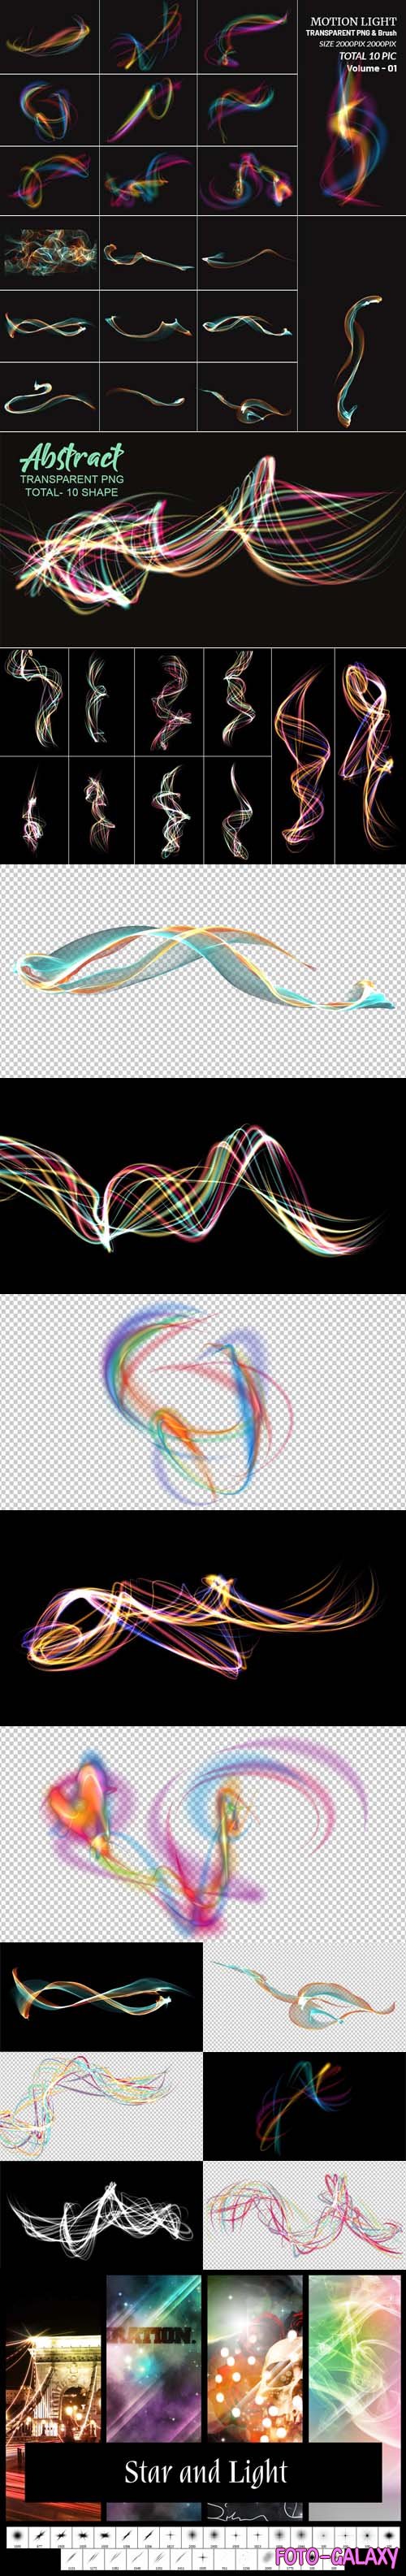 Abstract Motion Light Brushes Collection for Photoshop